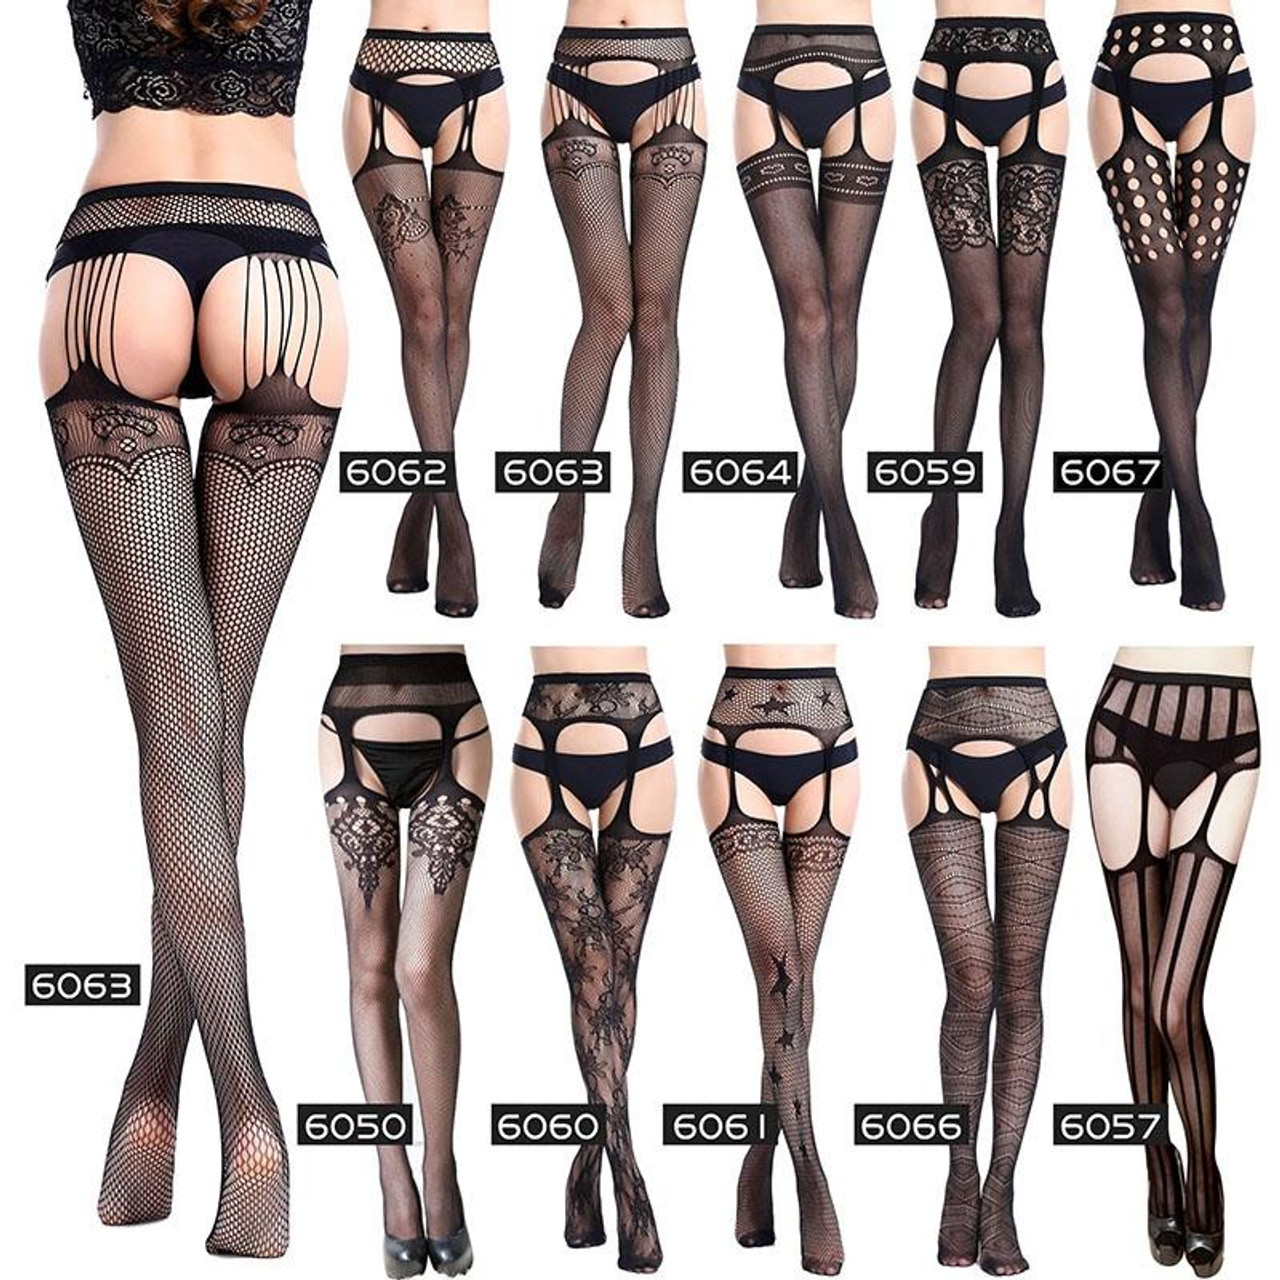 3 PCS Hollow Out Tights Lace Sexy Stockings Female Thigh High Fishnet  Embroidery Transparent Pantyhose Women Black Lace Hosiery, Size:One size  simple package (OPP)(6054), snatcher